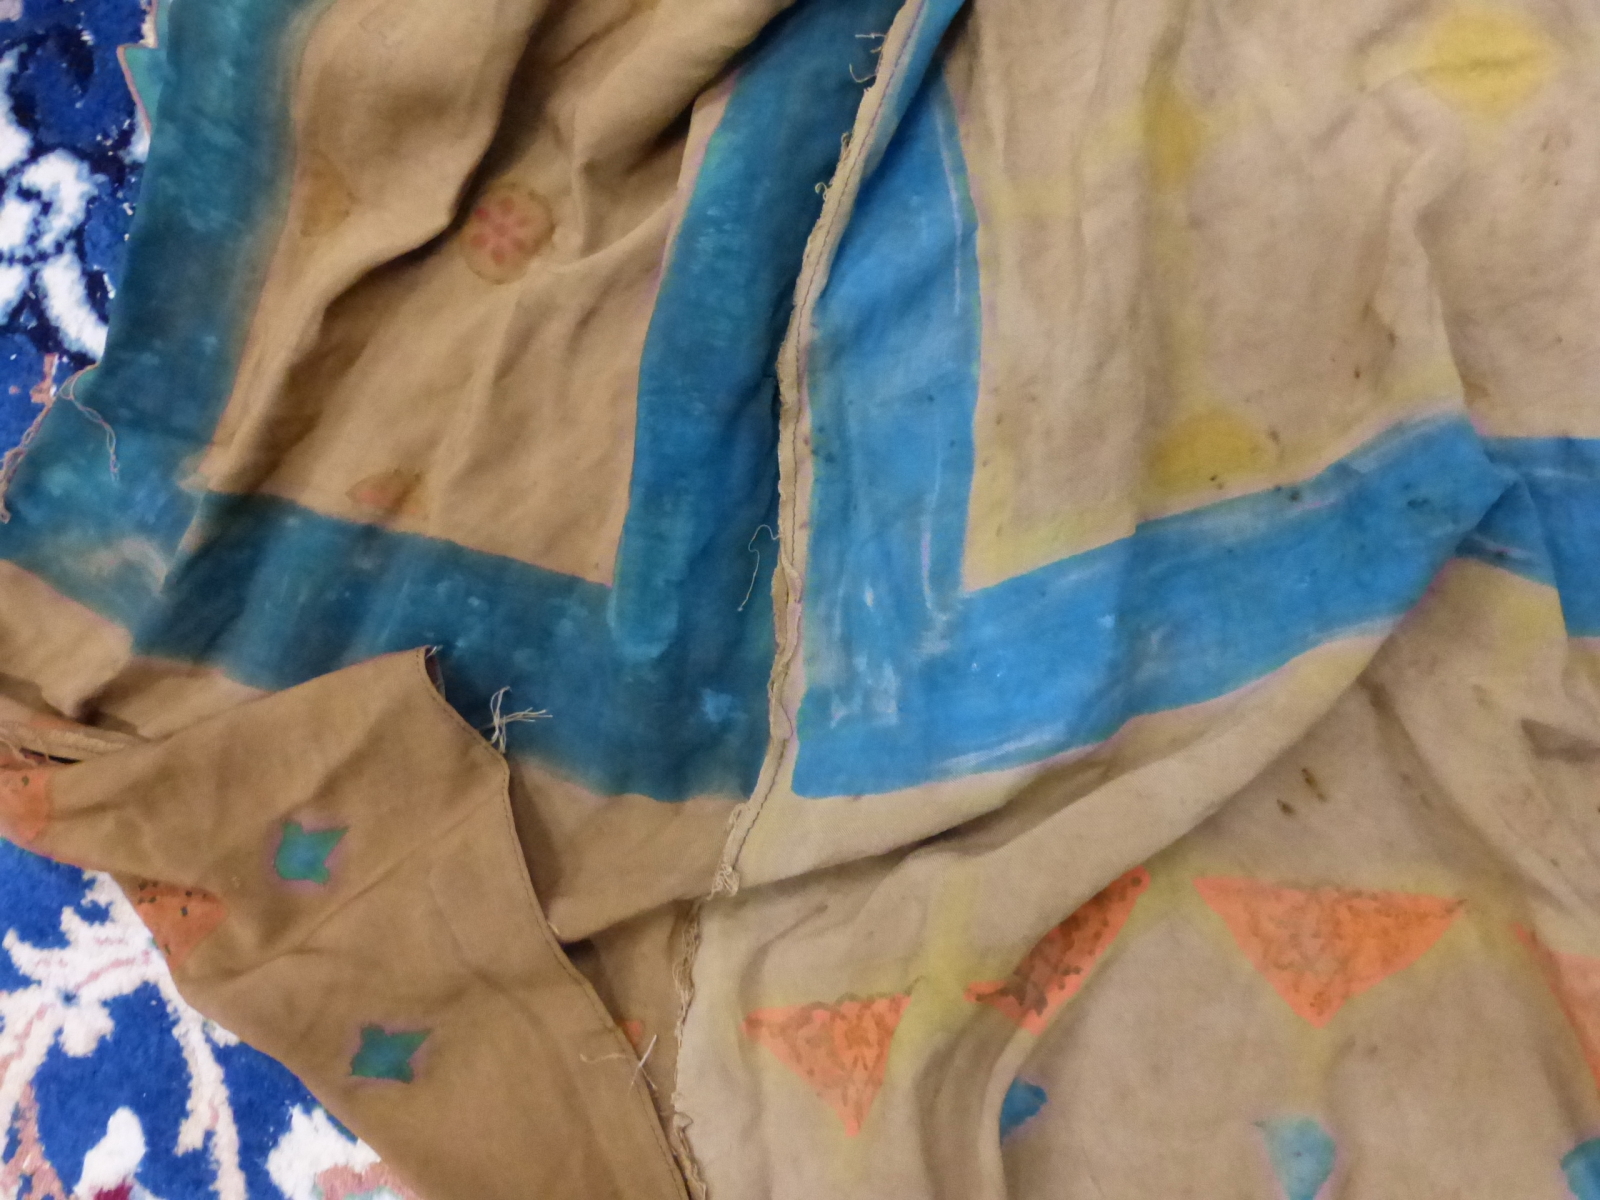 AN ISLAMIC TALISMANIC BROWN TUNIC PAINTED WITH BLUE EDGING AND ORANGE DETAILS ABOUT INSCRIPTIONS - Image 7 of 8